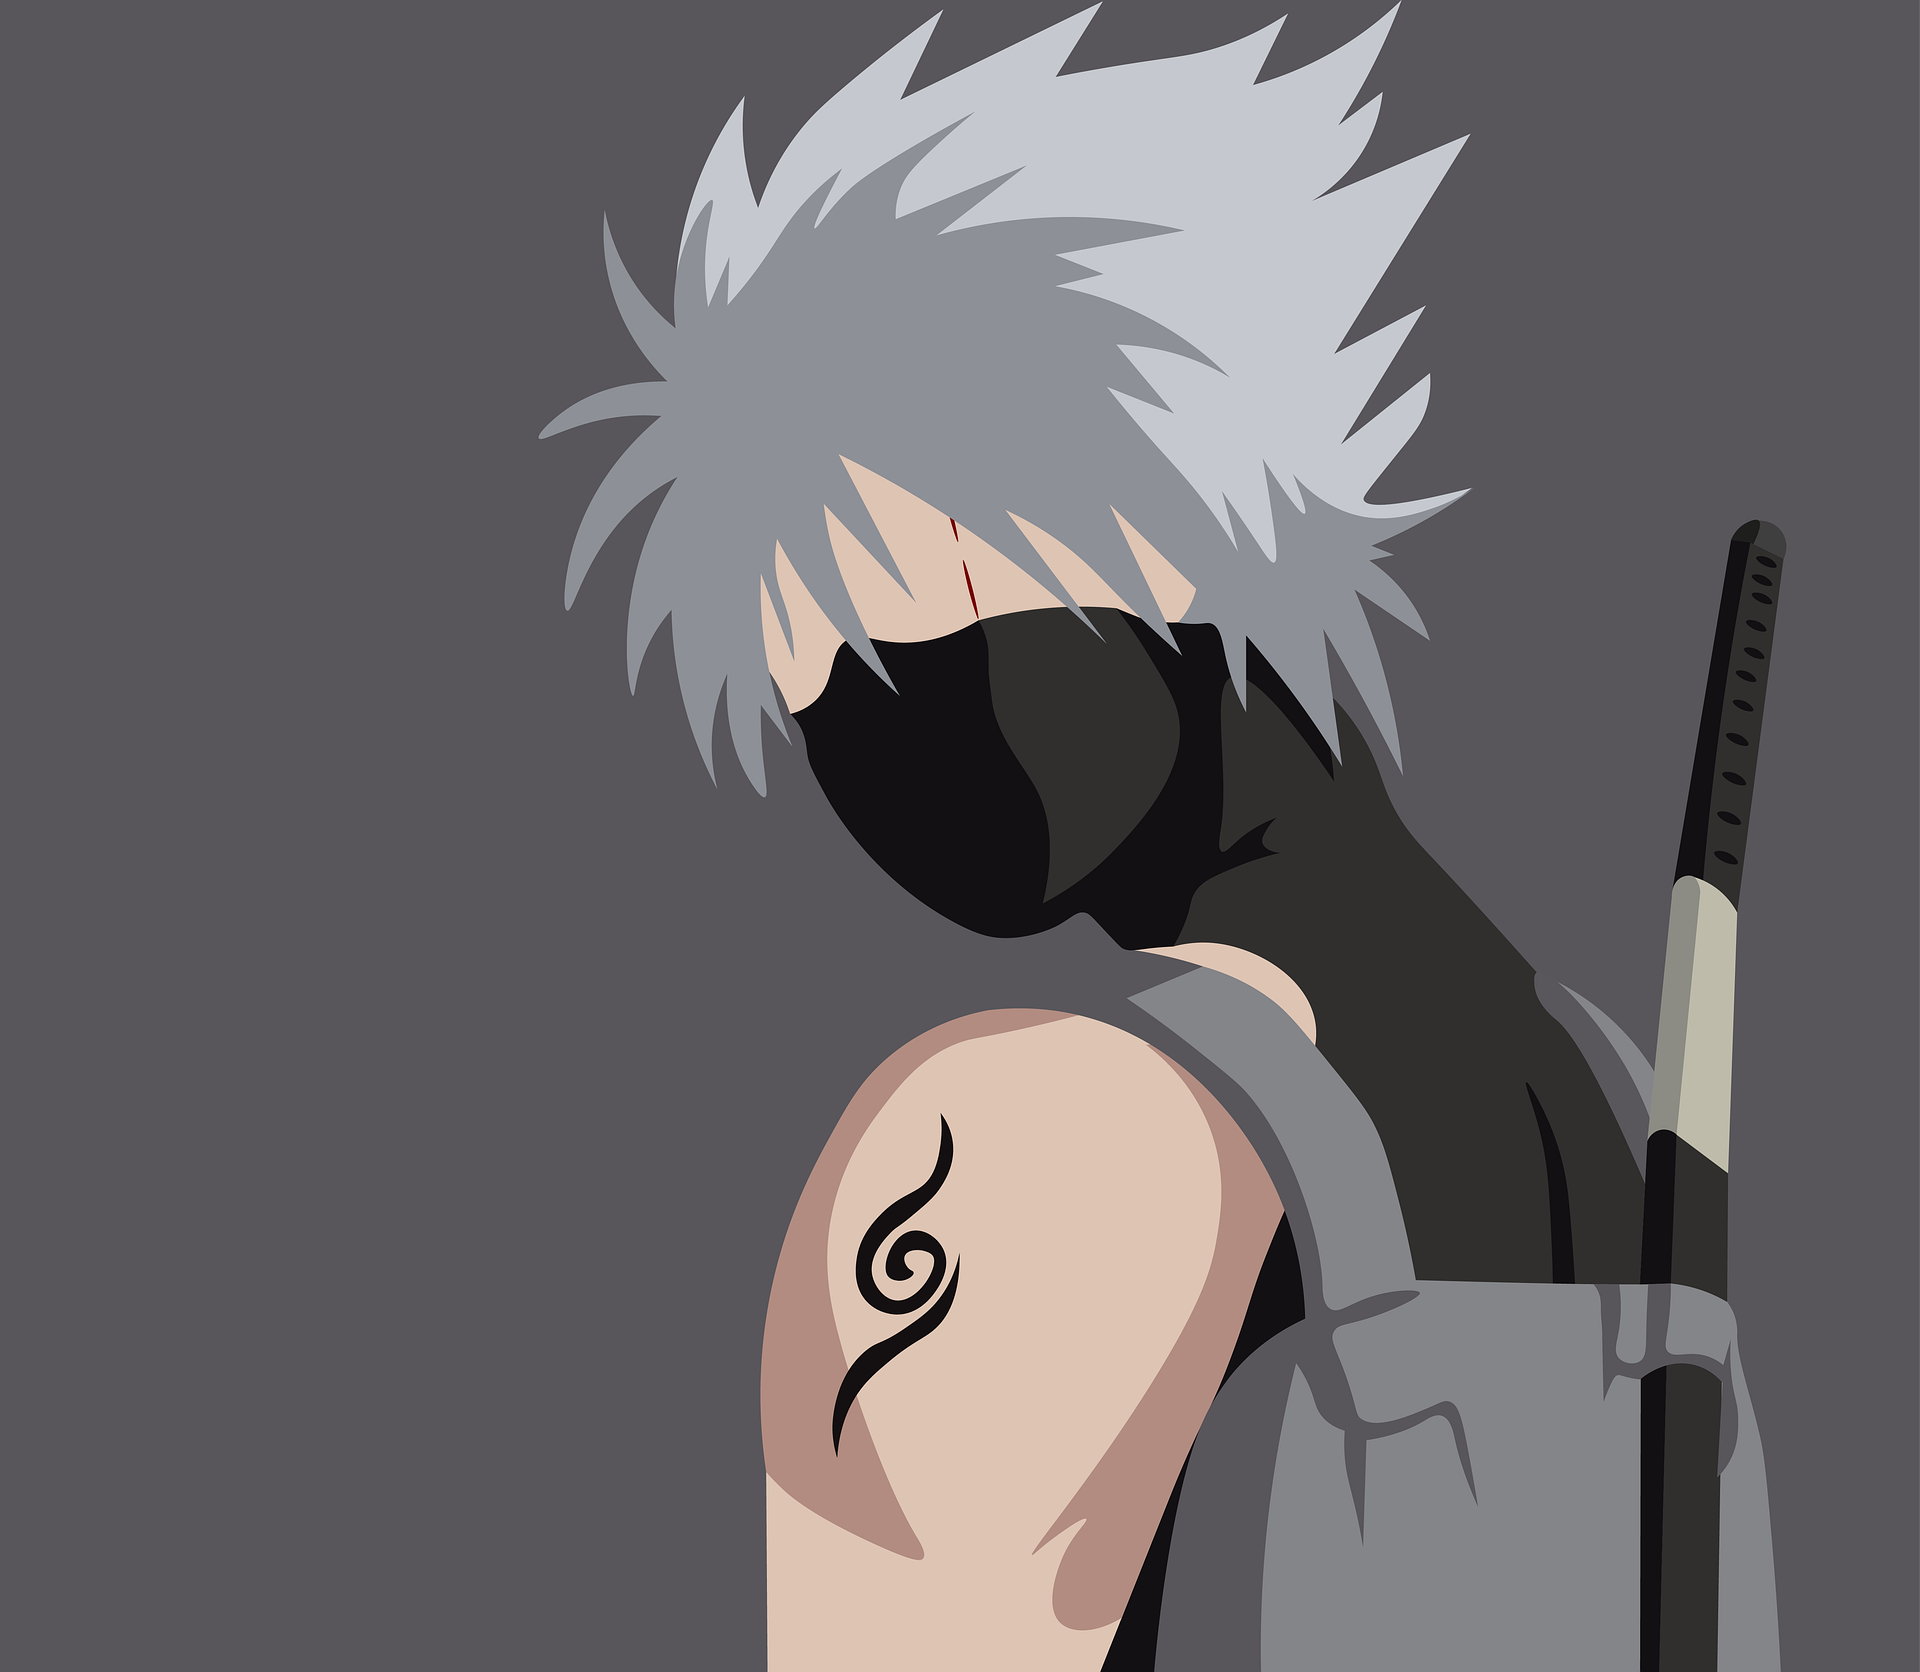 Why Does Kakashi Hatake Cover His Face?